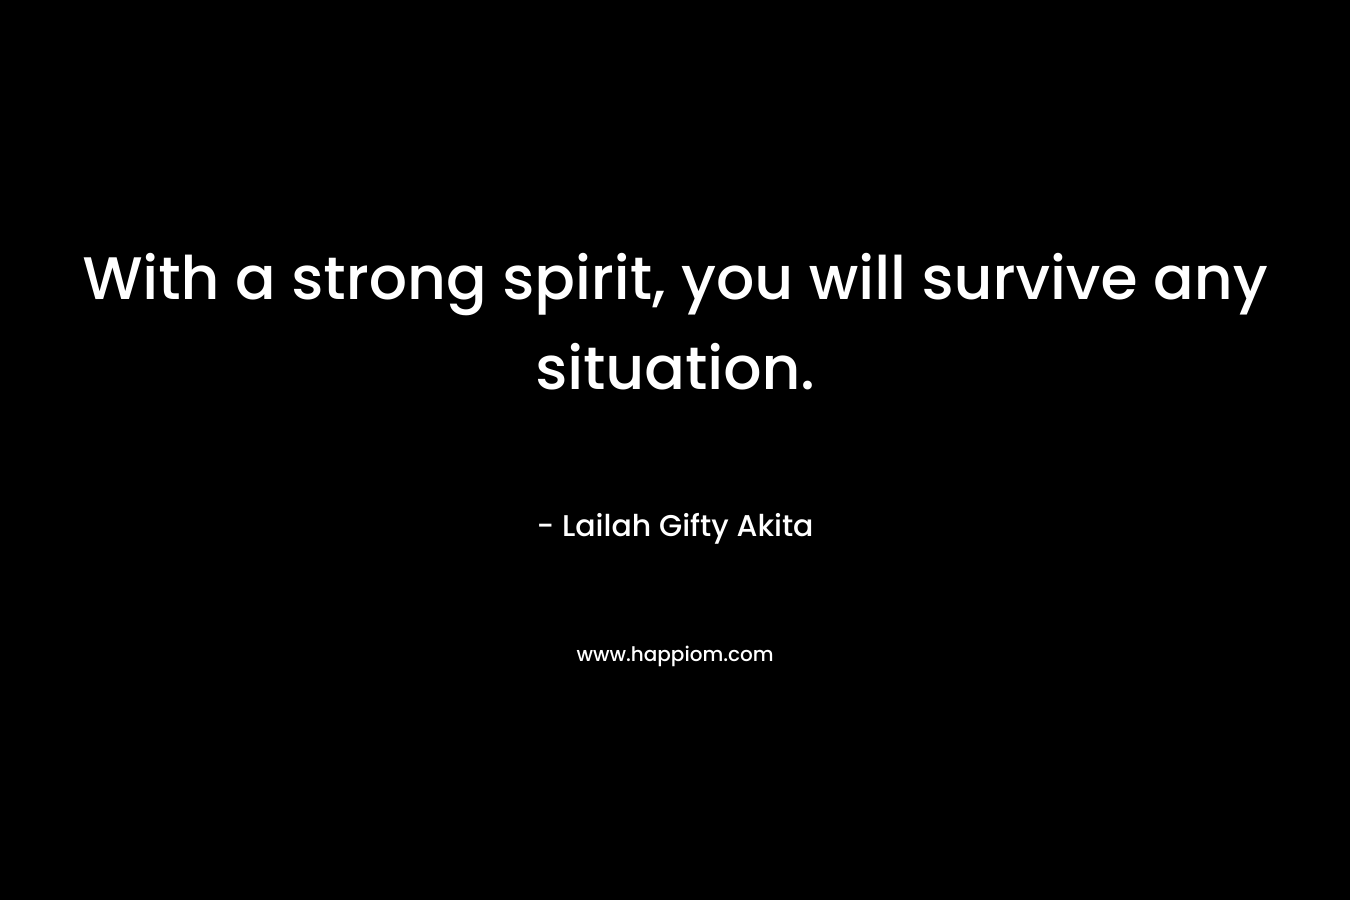 With a strong spirit, you will survive any situation.